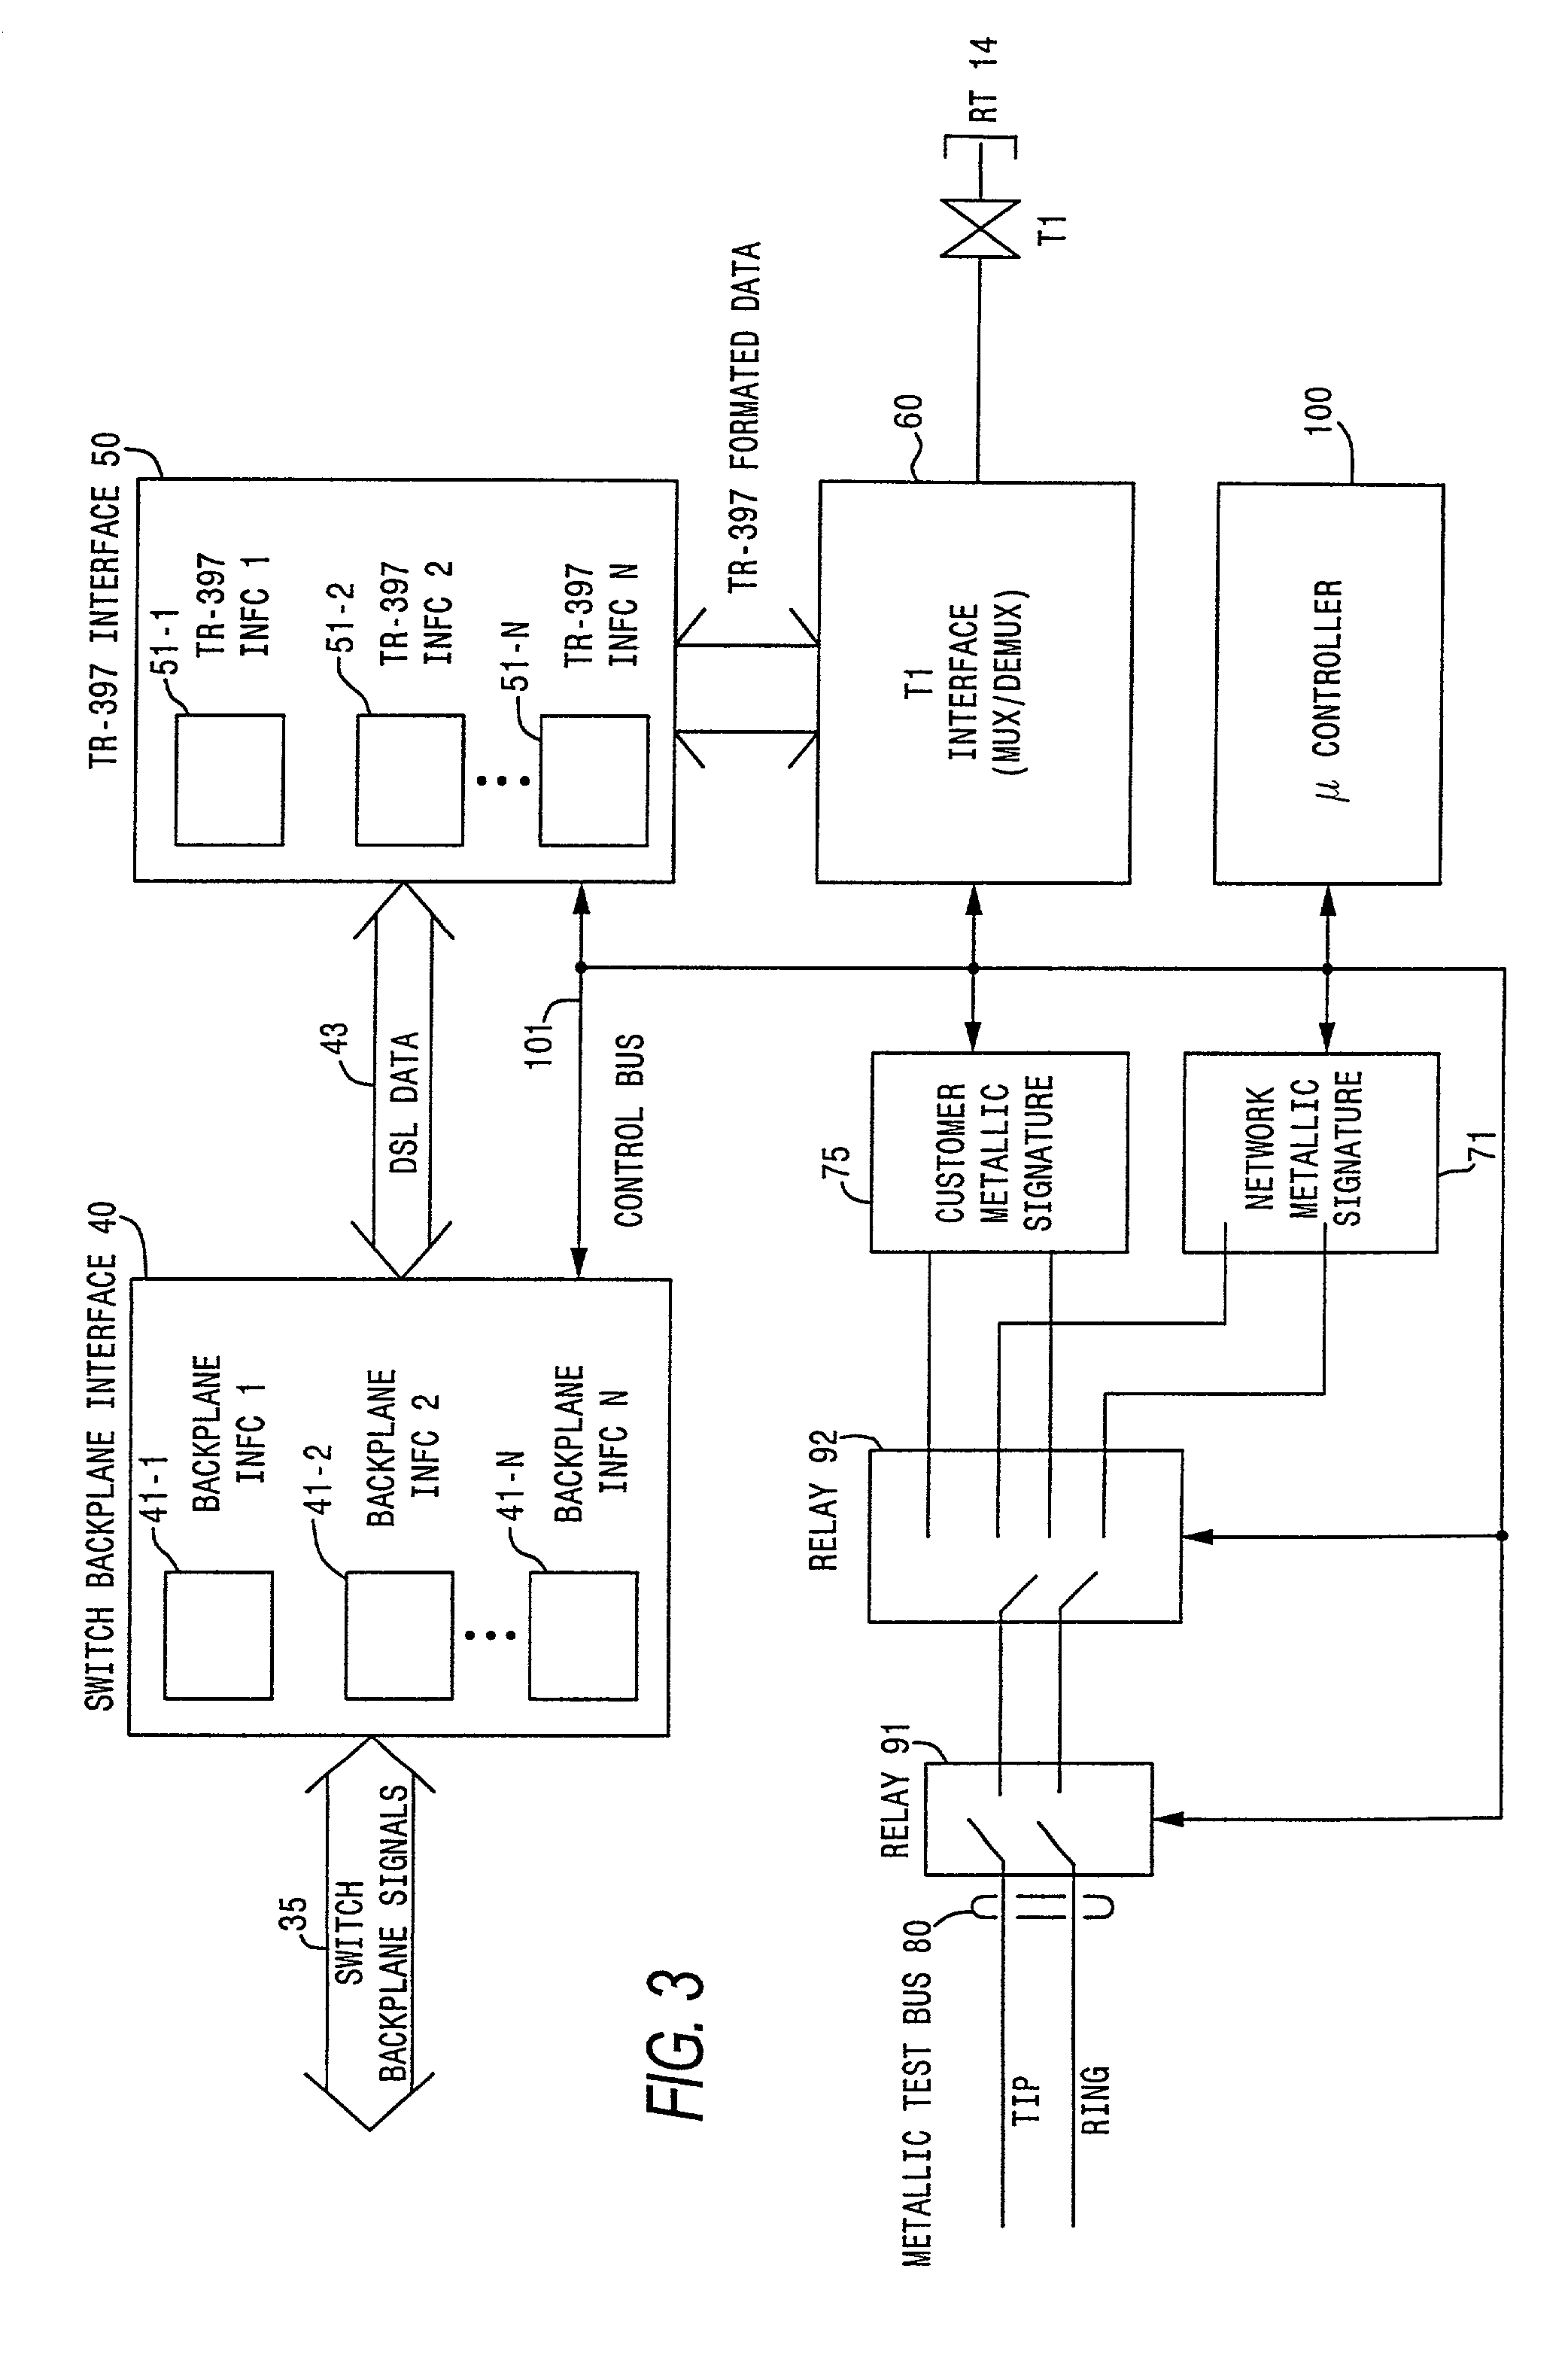 Digital switch-resident multi-circuit line card providing direct connection to remote terminal